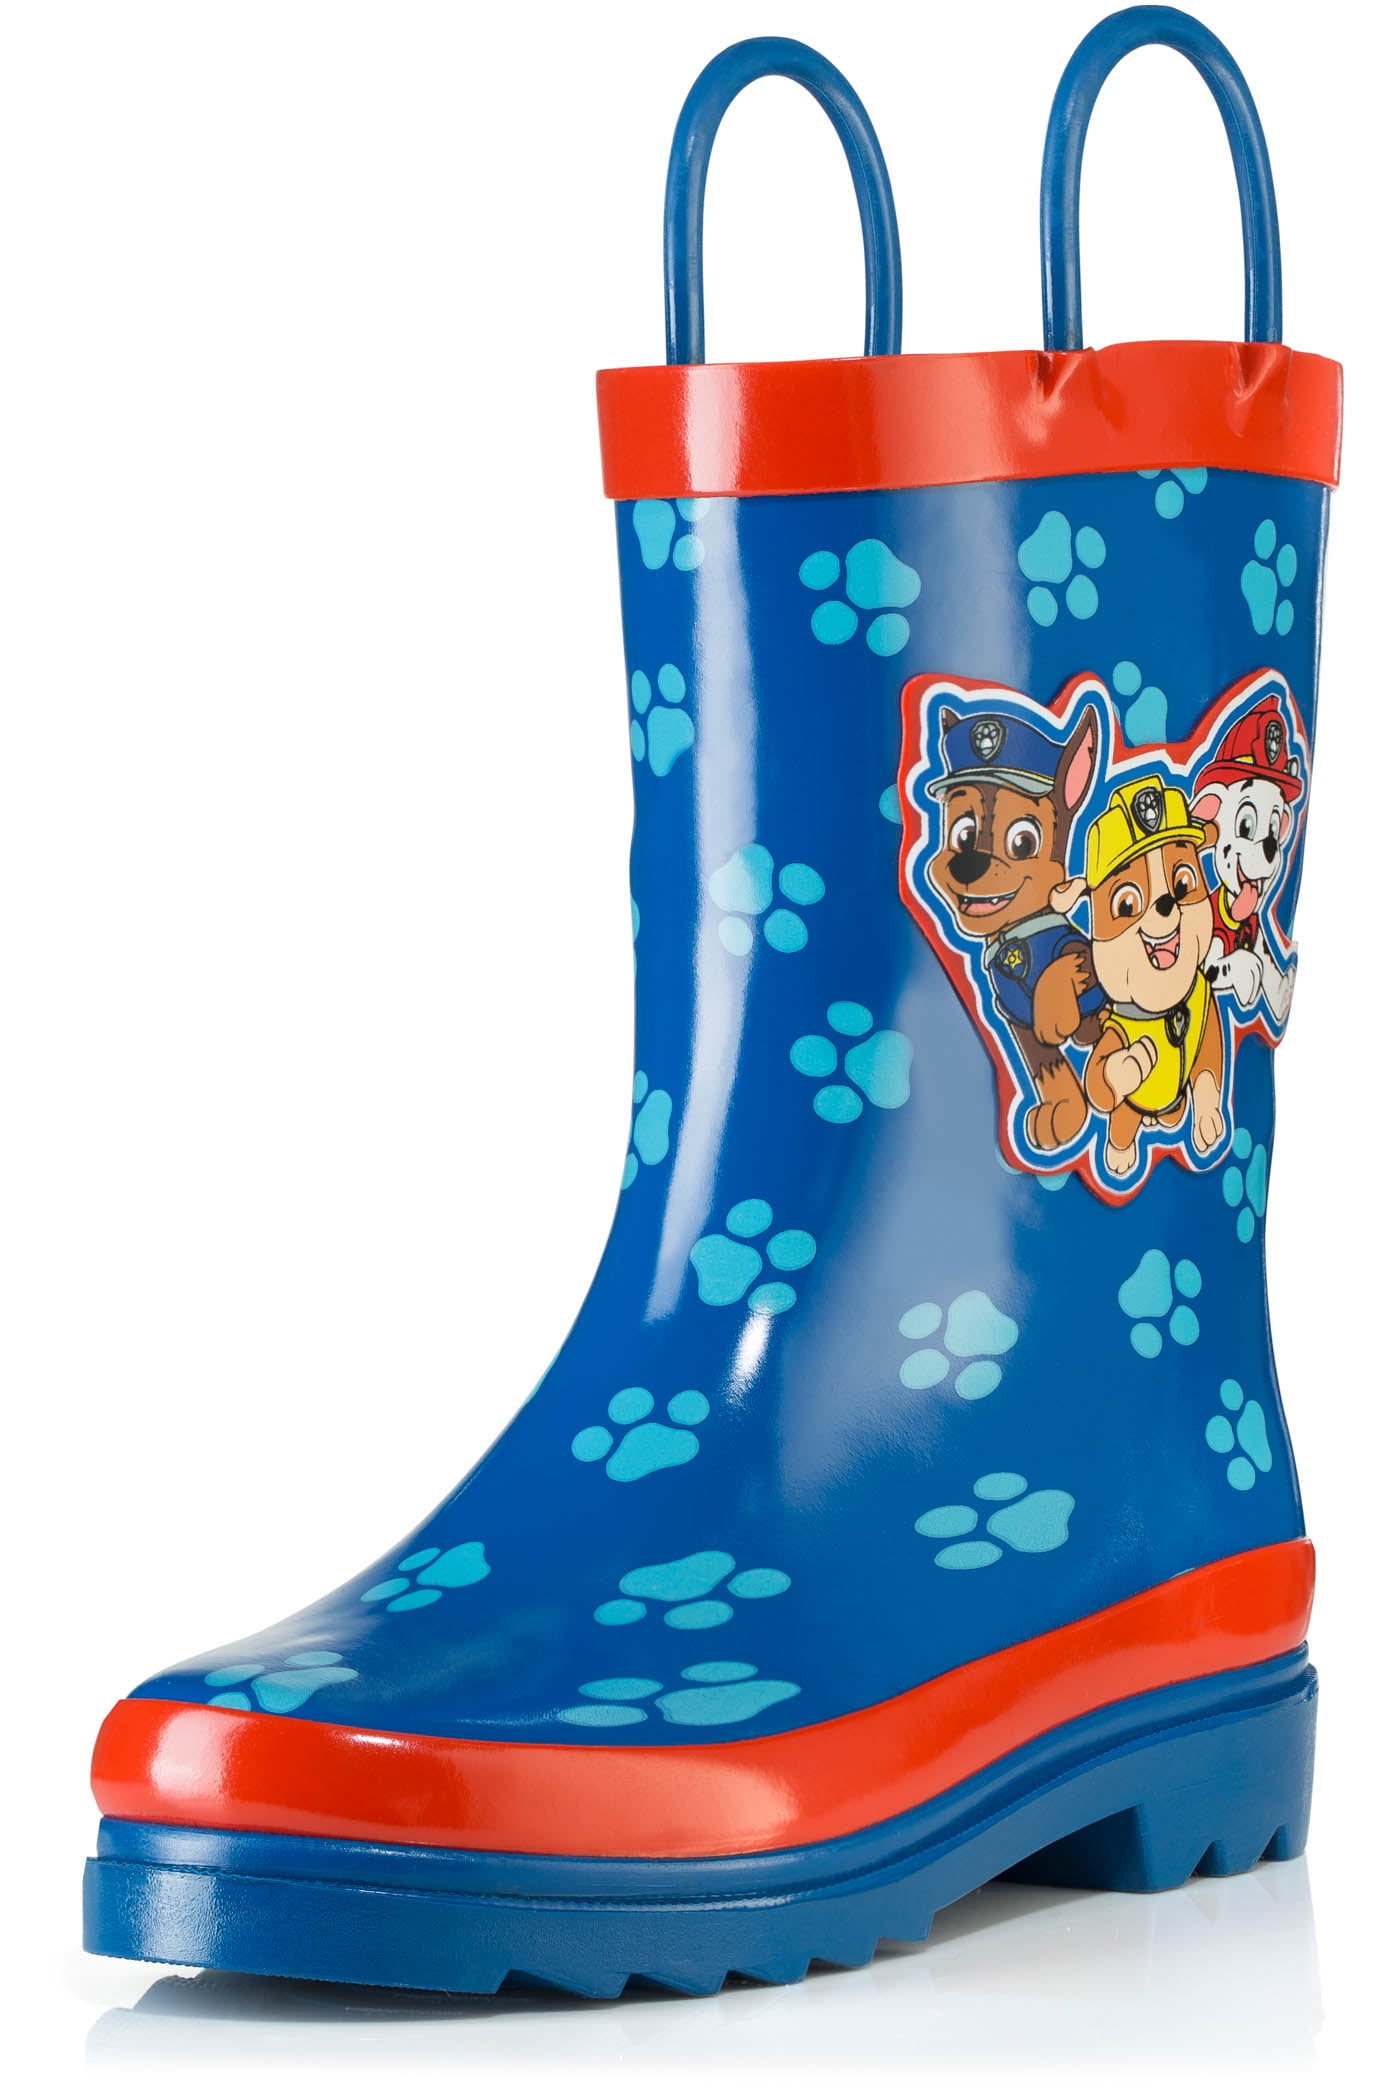 Childrens Paw Patrol Chase Wellies Wellington Boots Blue Kids Sizes 4 5 6 7 8 9 